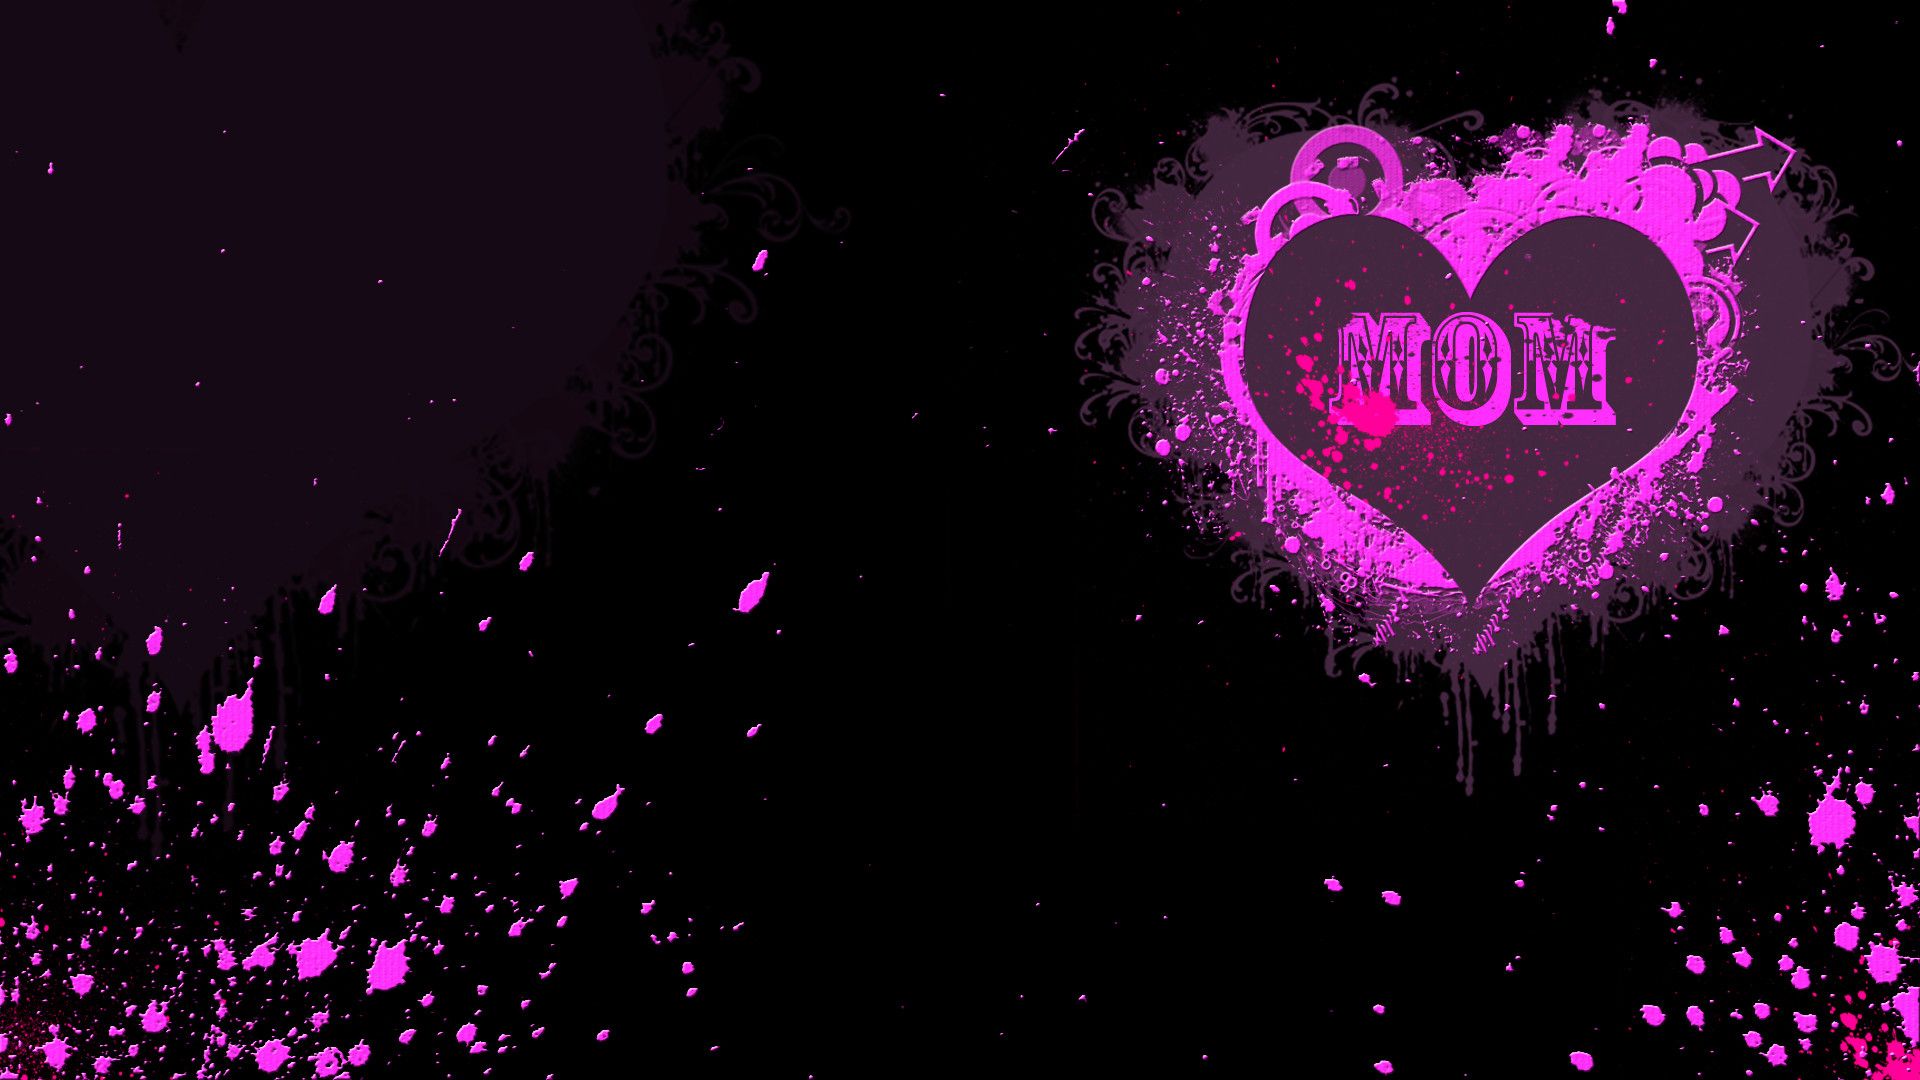 Mothers Day Wallpaper Image